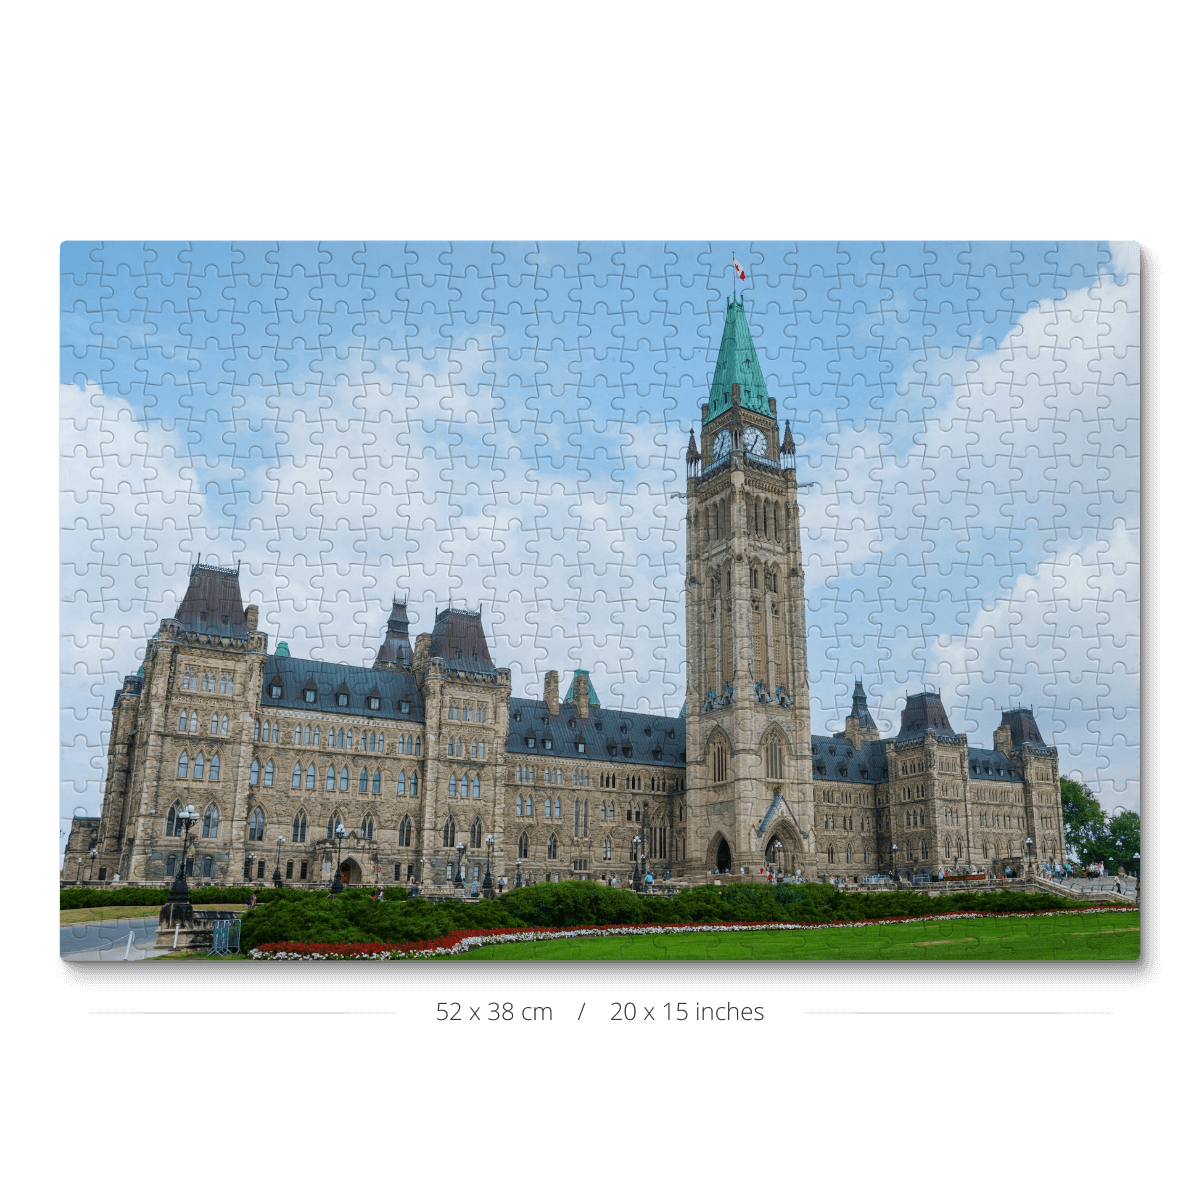 A 500-piece jigsaw puzzle featuring a photo of the Ottawa Parliament, with intricate details and vibrant colors.